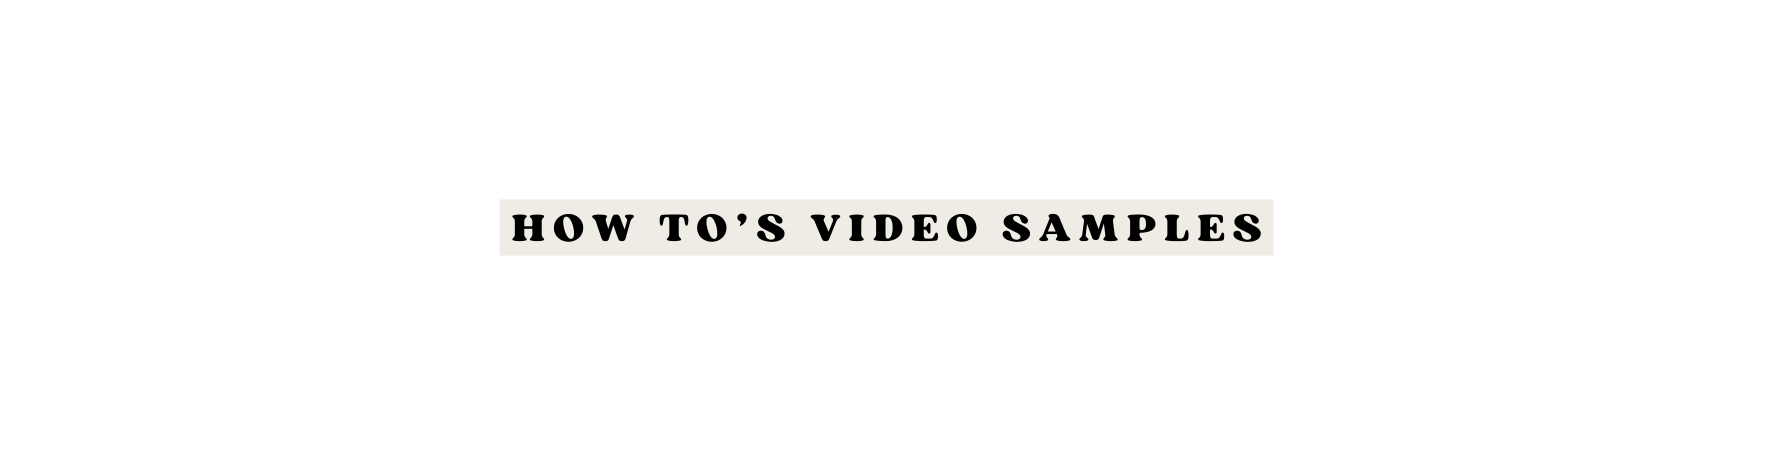 HOW TO S VIDEO SAMPLES